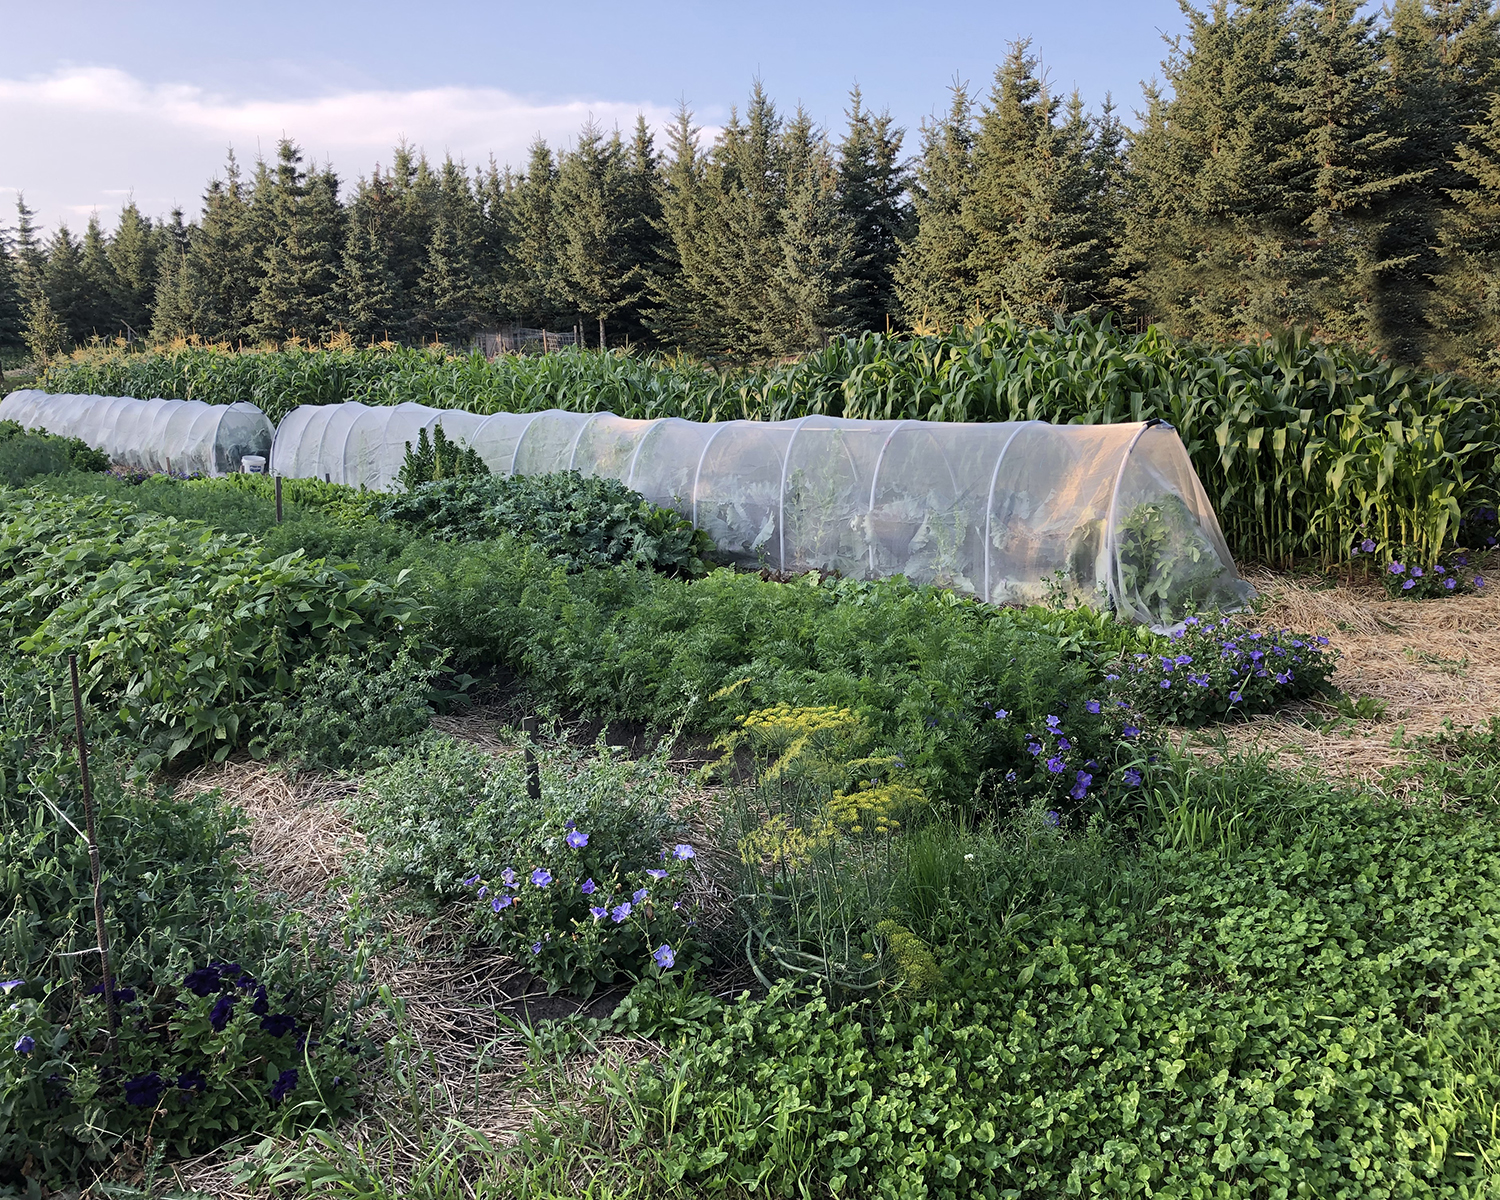 Abundant plants in several no-till garden beds and a low tunnel made of mesh